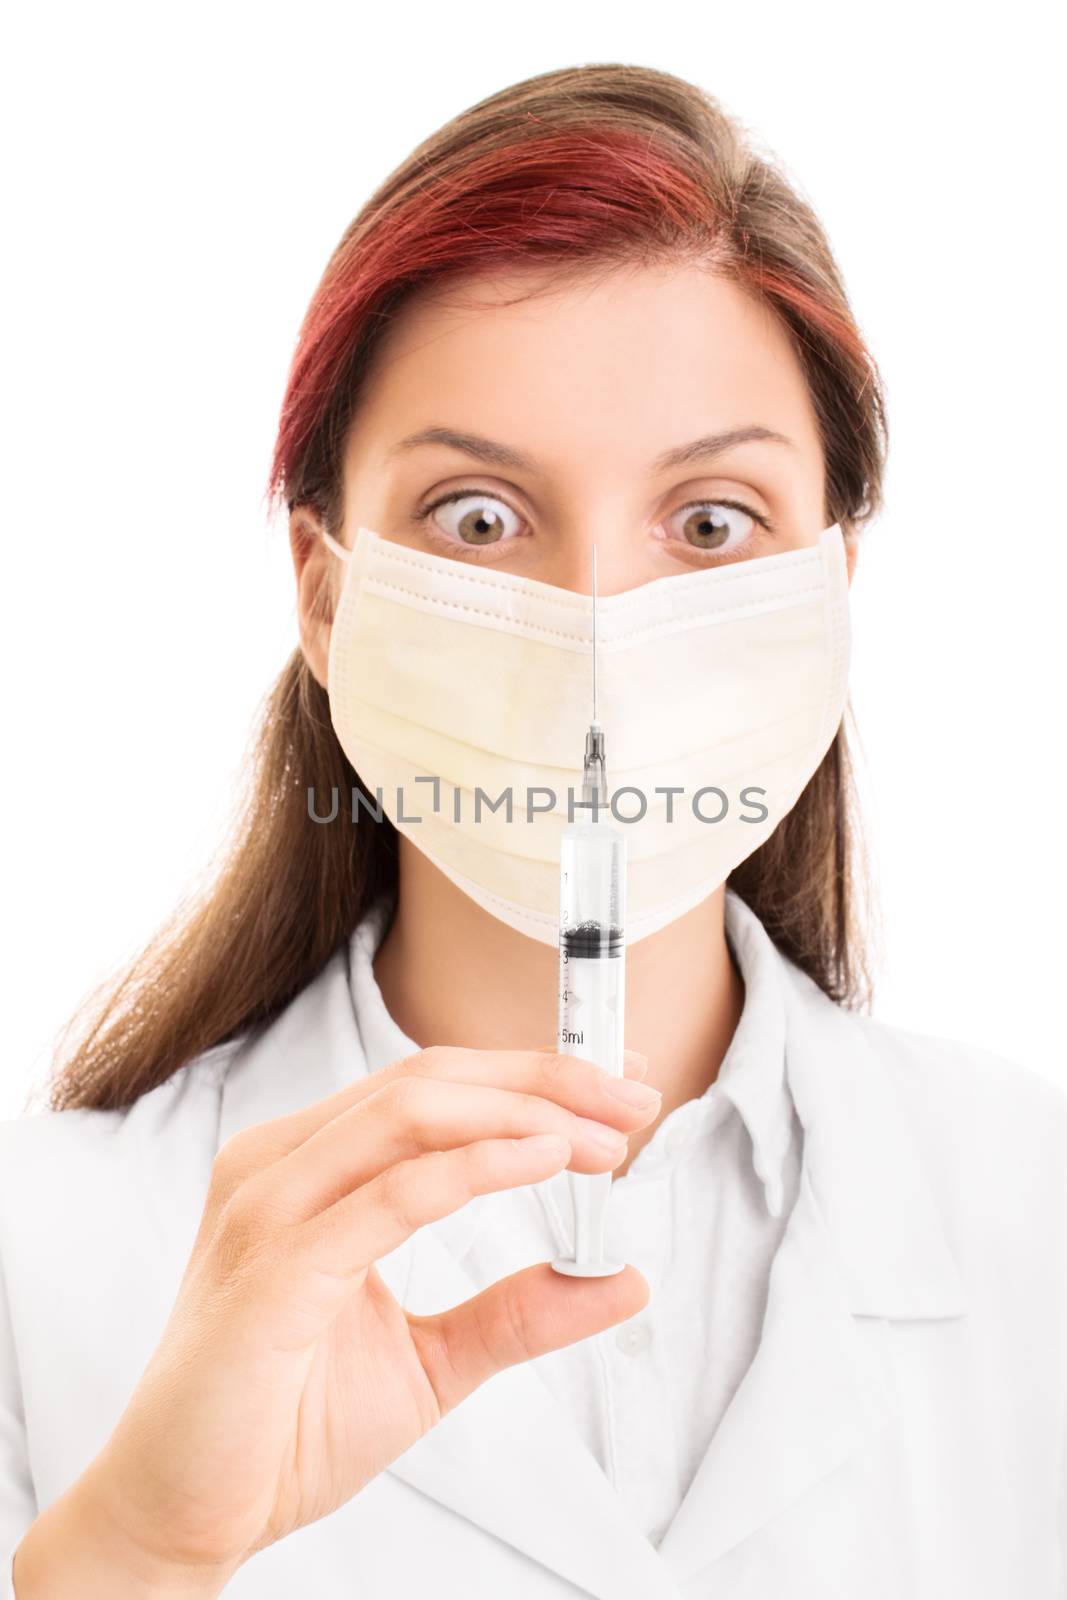 What do i do with this syringe? Young medical practitioner wearing a surgical mask, looking at a syringe with a needle, isolated on white background.